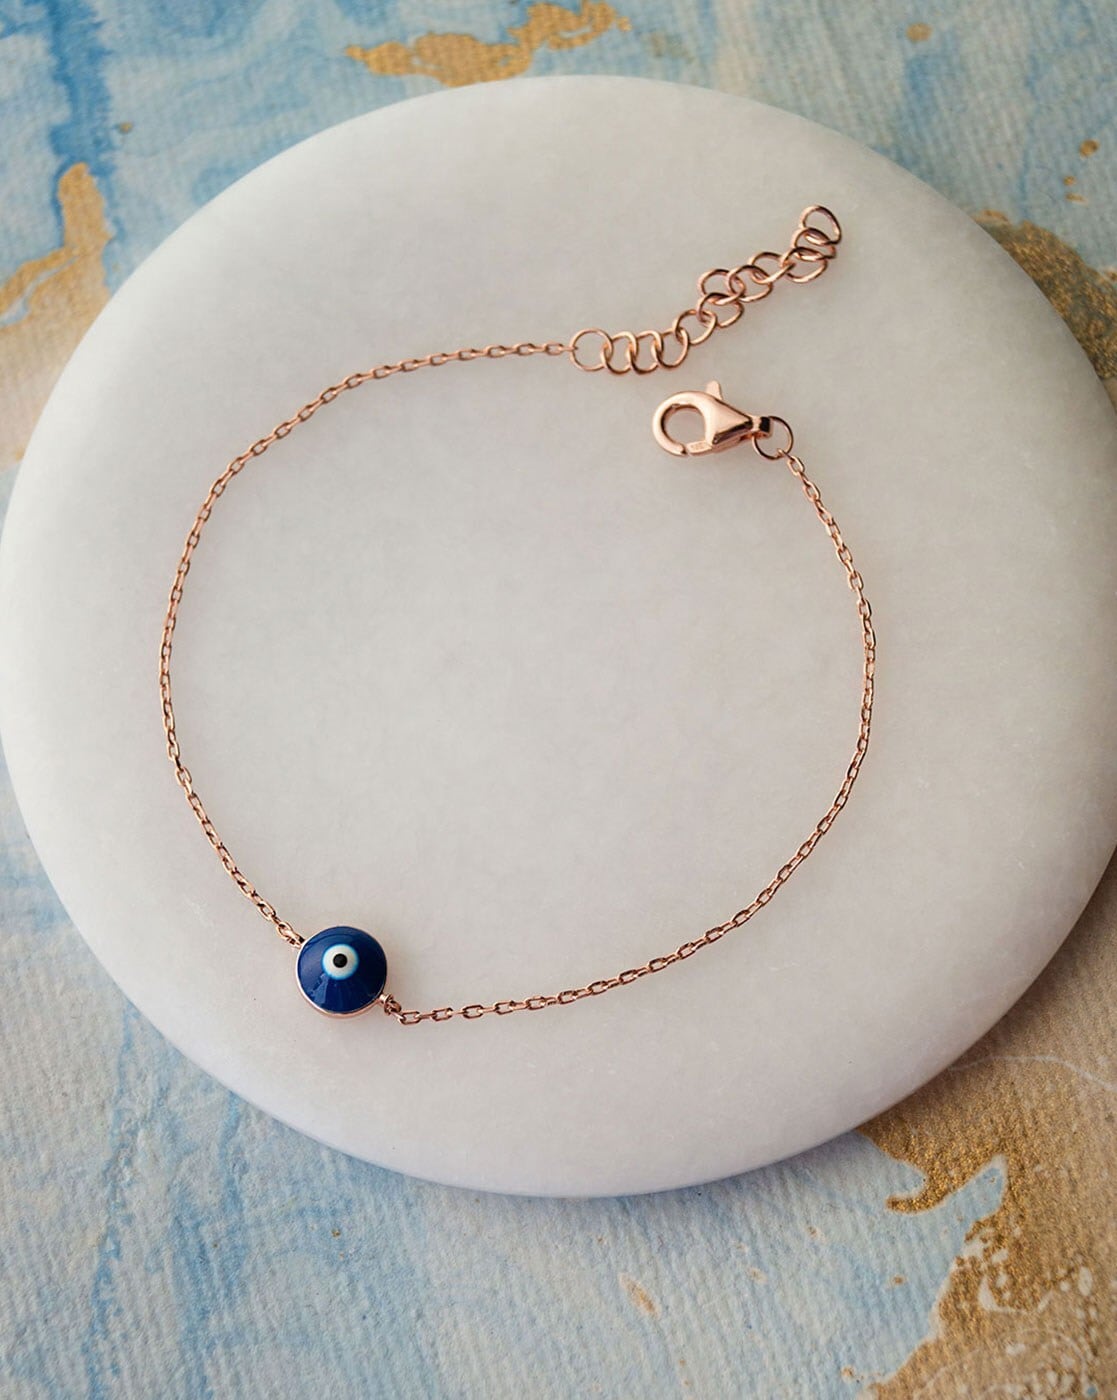 Evil Eye Bracelet with Tiny Hearts in Chain - Evil Eyes India